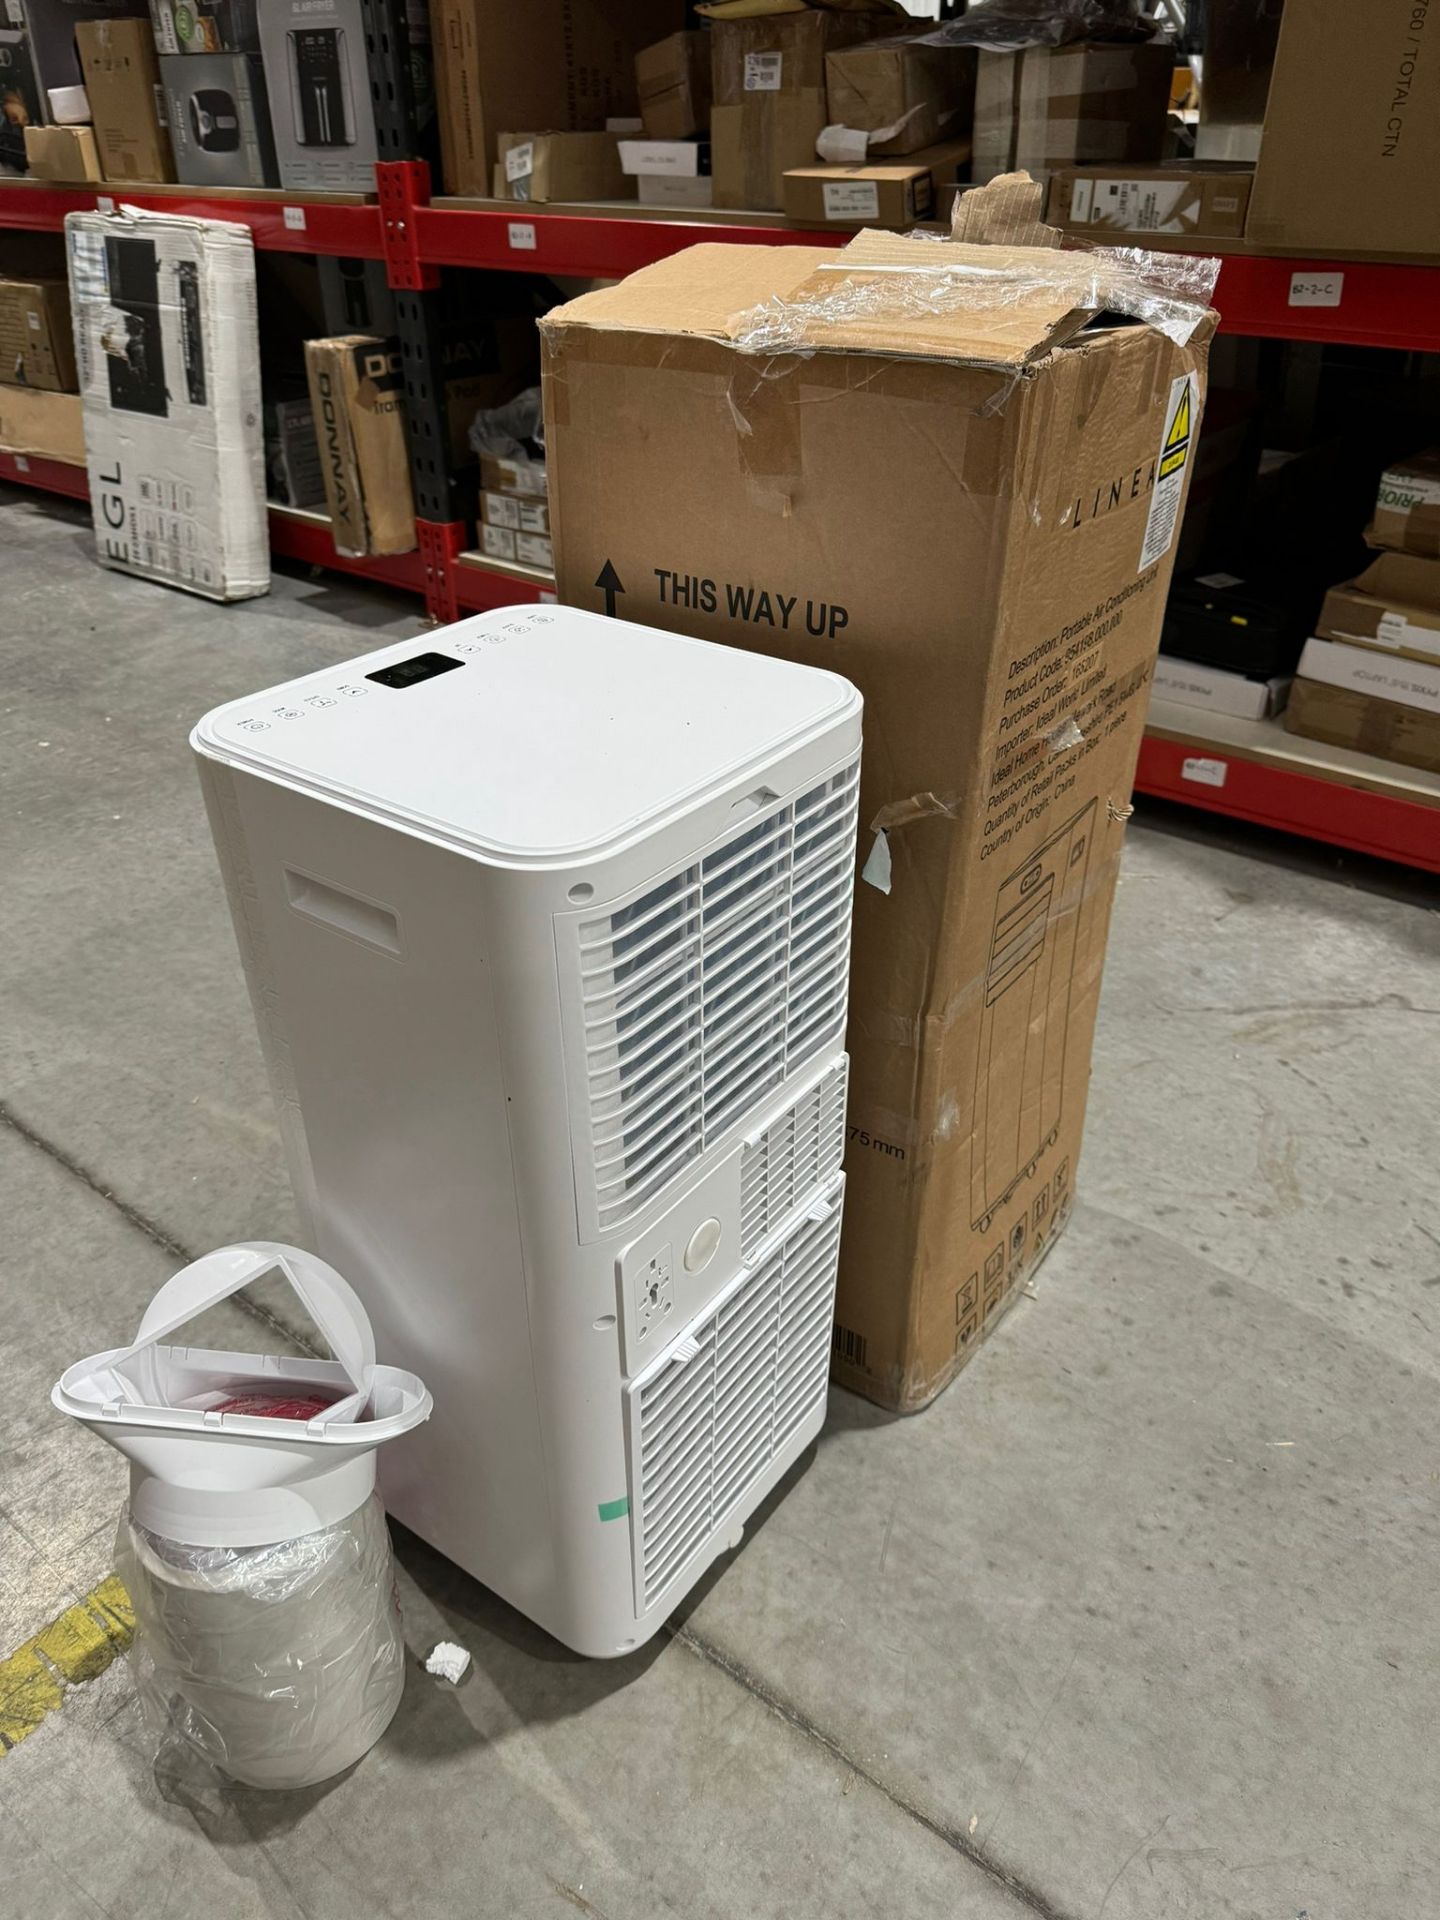 1 x LINEA Portable Air Conditioning Unit - 954198.000.000 with Window Kit - NO RESERVE - Image 5 of 8